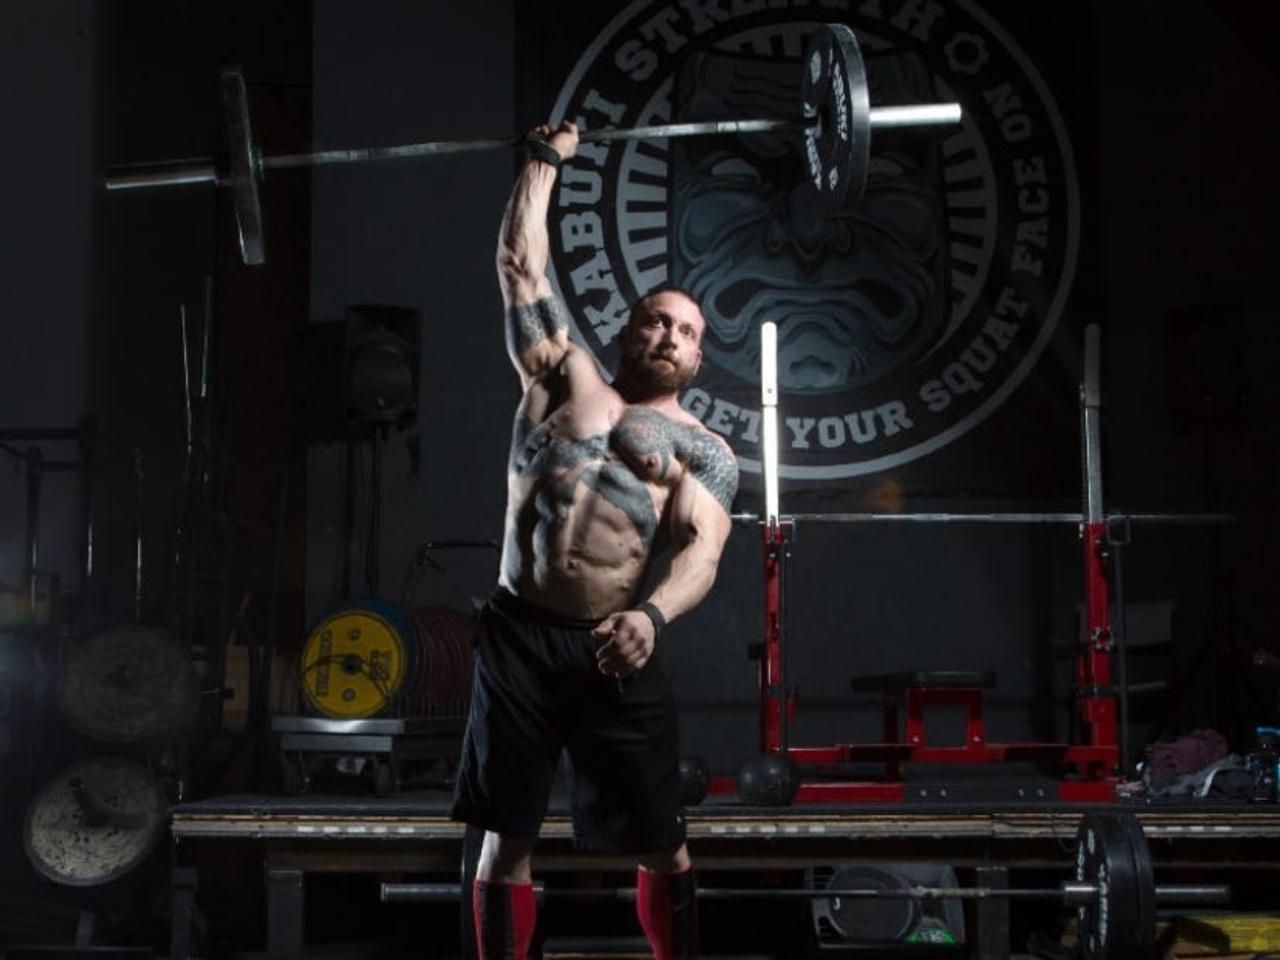 Chris Duffin, a world record holding power lifter, said strength training beginners can make quick progress on muscle building, with the right strategy.